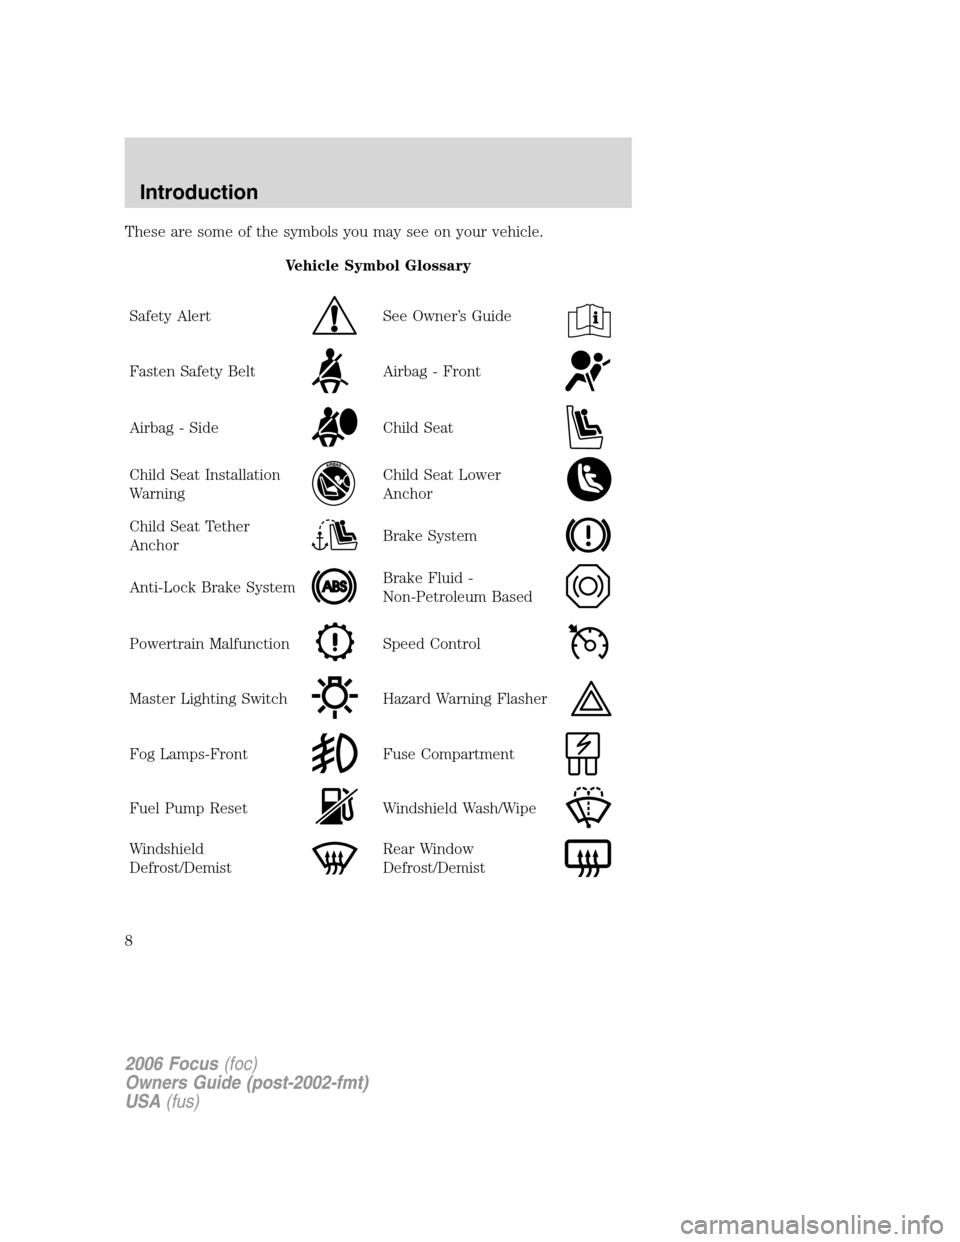 FORD FOCUS 2006 2.G Owners Manual These are some of the symbols you may see on your vehicle.
Vehicle Symbol Glossary
Safety Alert
See Owner’s Guide
Fasten Safety BeltAirbag - Front
Airbag - SideChild Seat
Child Seat Installation
War